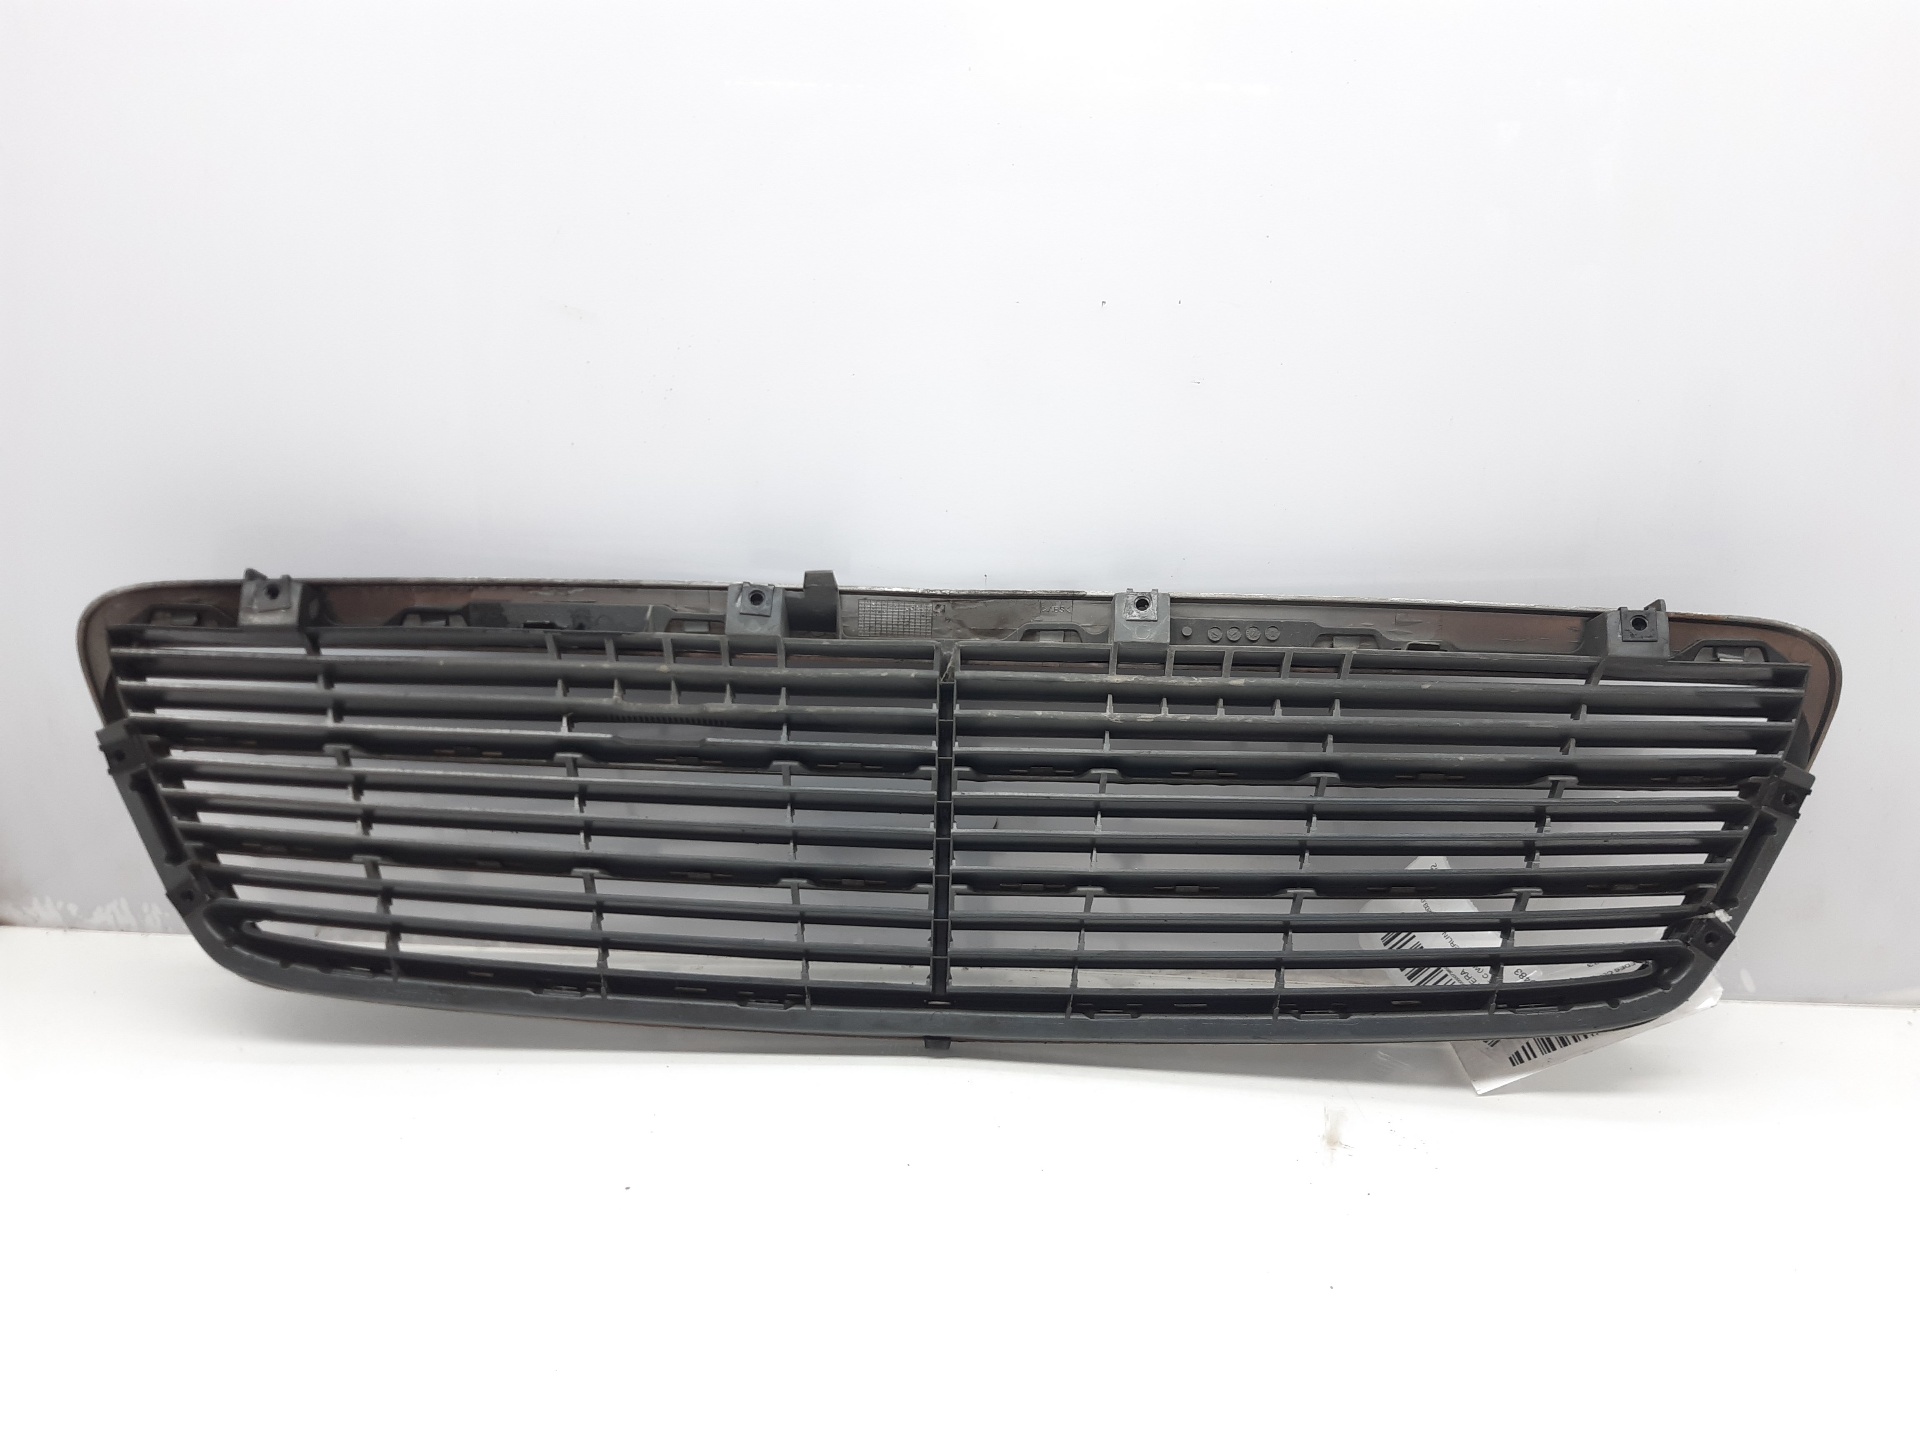 MERCEDES-BENZ C-Class W203/S203/CL203 (2000-2008) Radiator Grille 2038800483 20164764